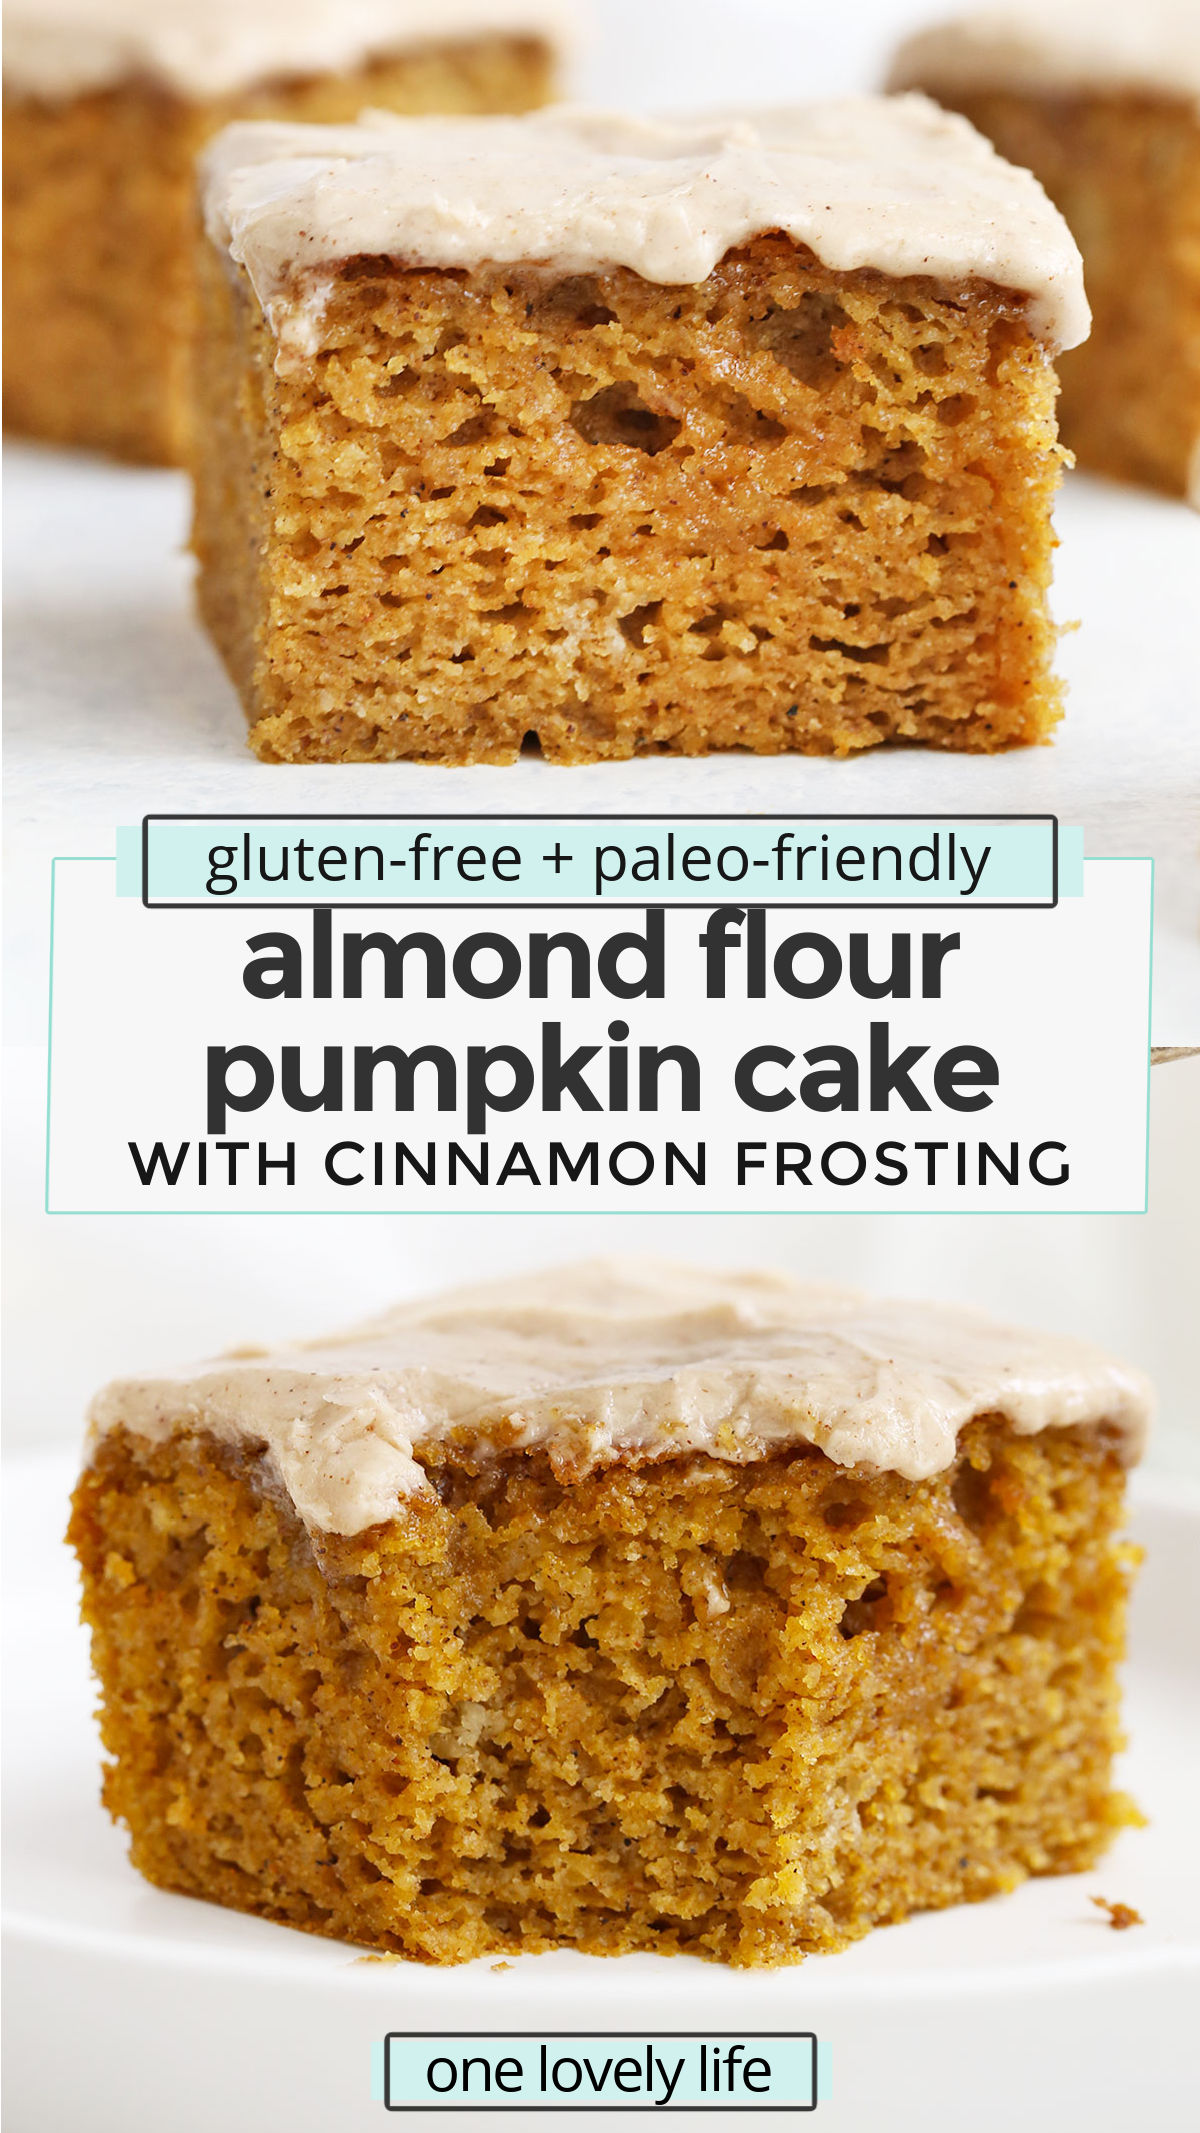 Gluten Free Pumpkin Cake with Cinnamon Frosting - This fluffy, perfectly-spiced pumpkin cake is what fall dreams are made of. It’s the best pumpkin cake I’ve ever tasted! (Paleo-Friendly) // The Best Pumpkin Cake Recipe // Almond flour Pumpkin Cake #glutenfree #cake #pumpkincake #pumpkin #frosting